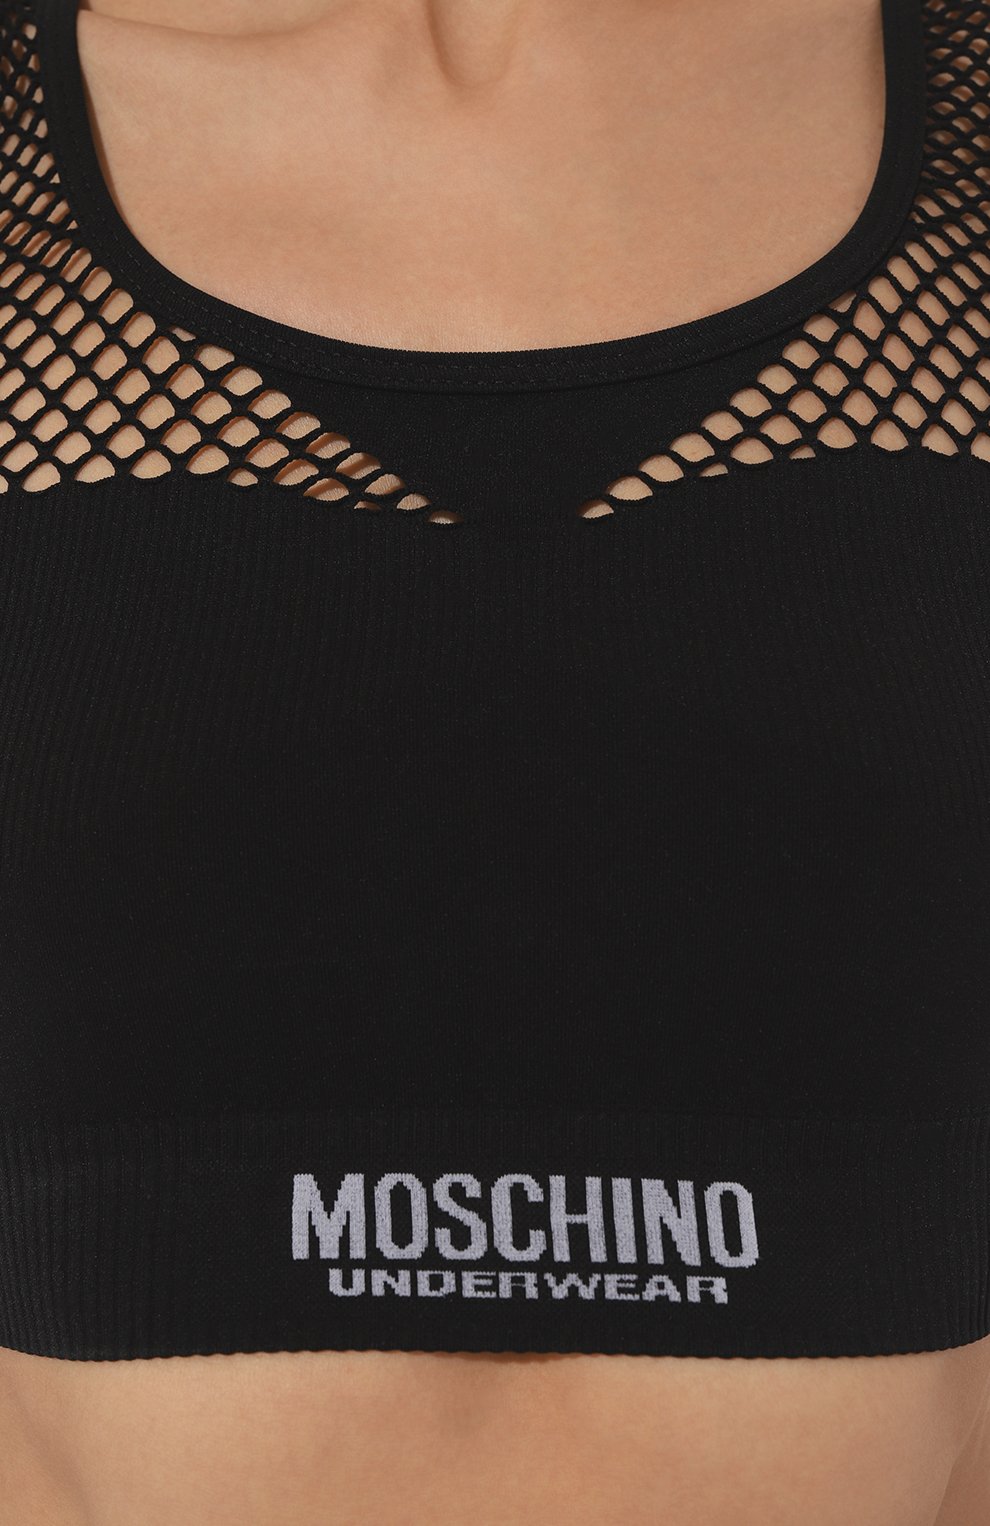 Moschino Sport Bras sale - discounted price